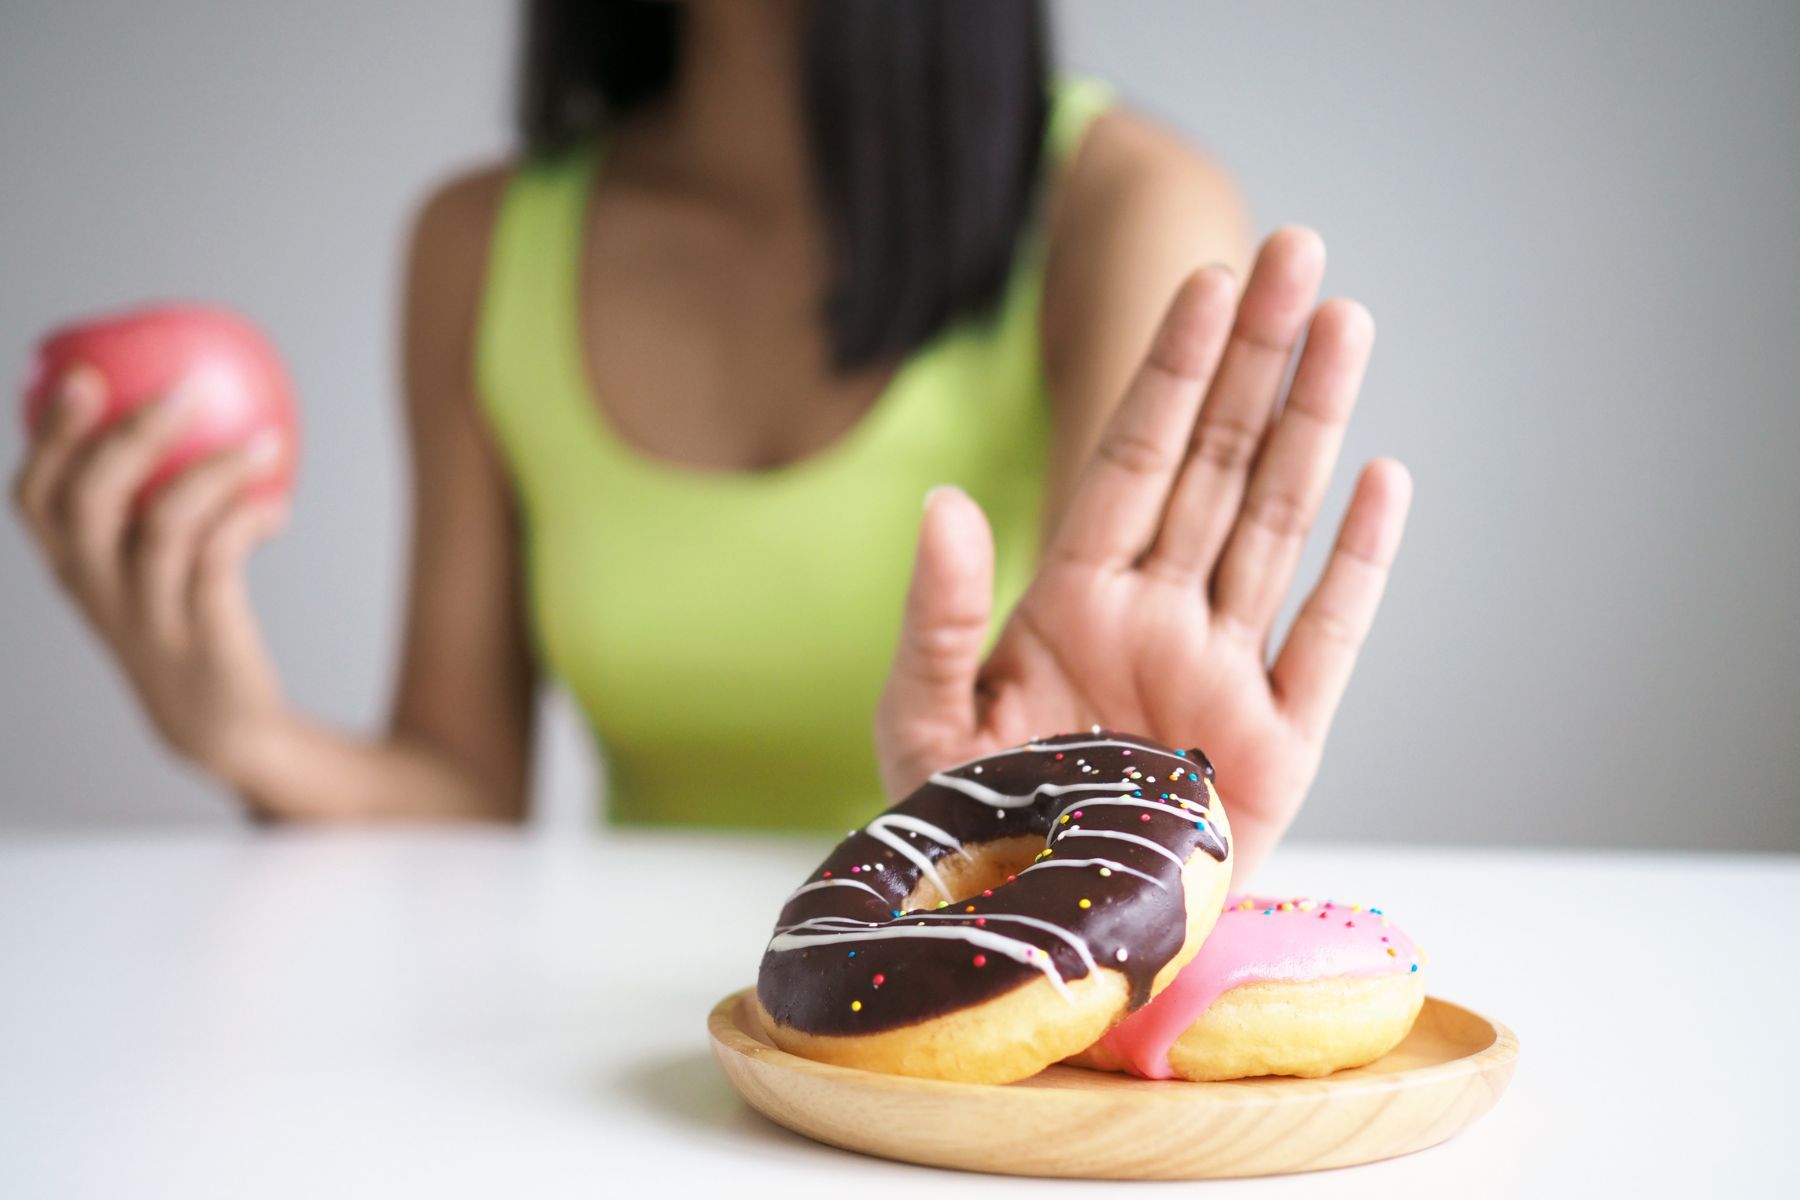 A woman rejects a plate of donuts before learning what happens when you stop dieting